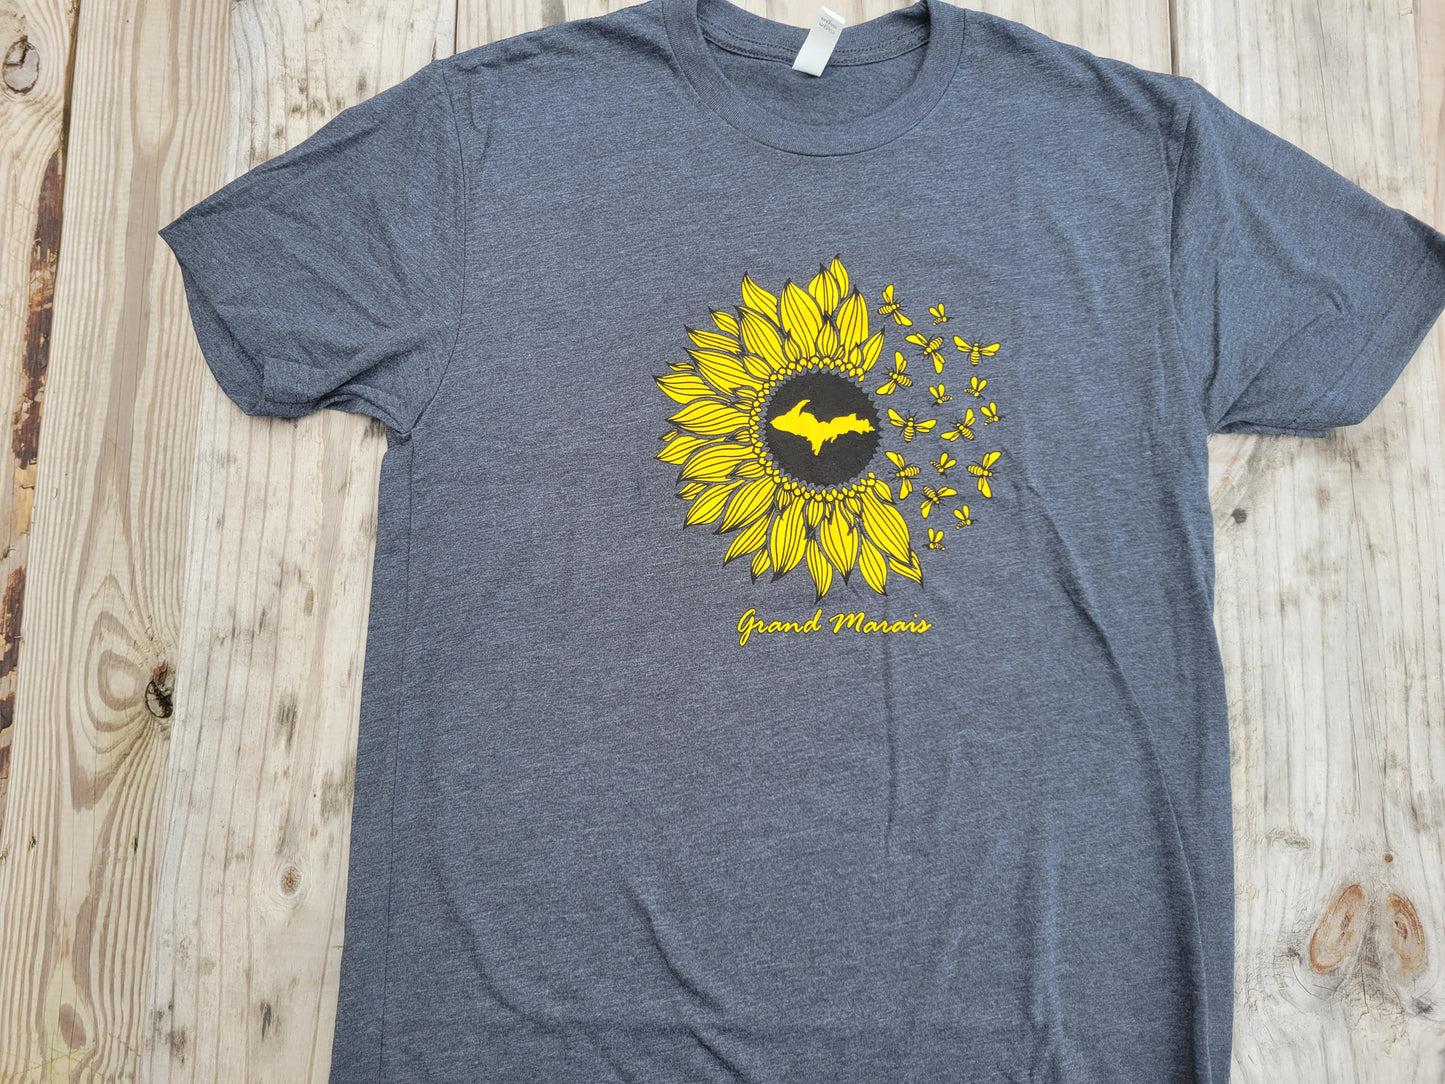 Sunflower with Bees short sleeve